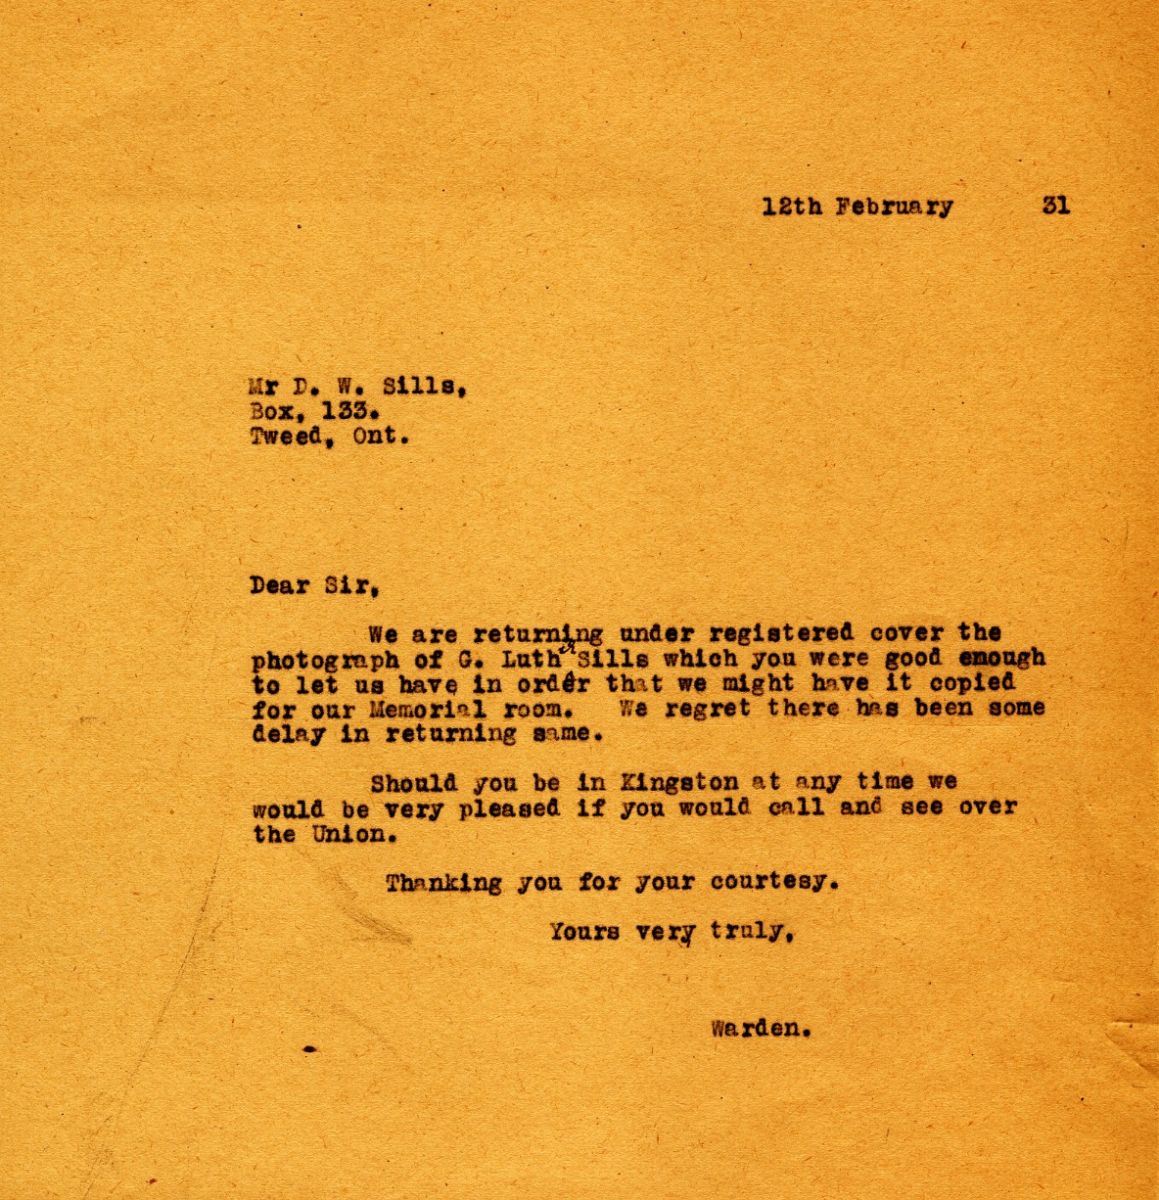 Letter from the Warden to Mr. D.W. Sills, 12th February 1931